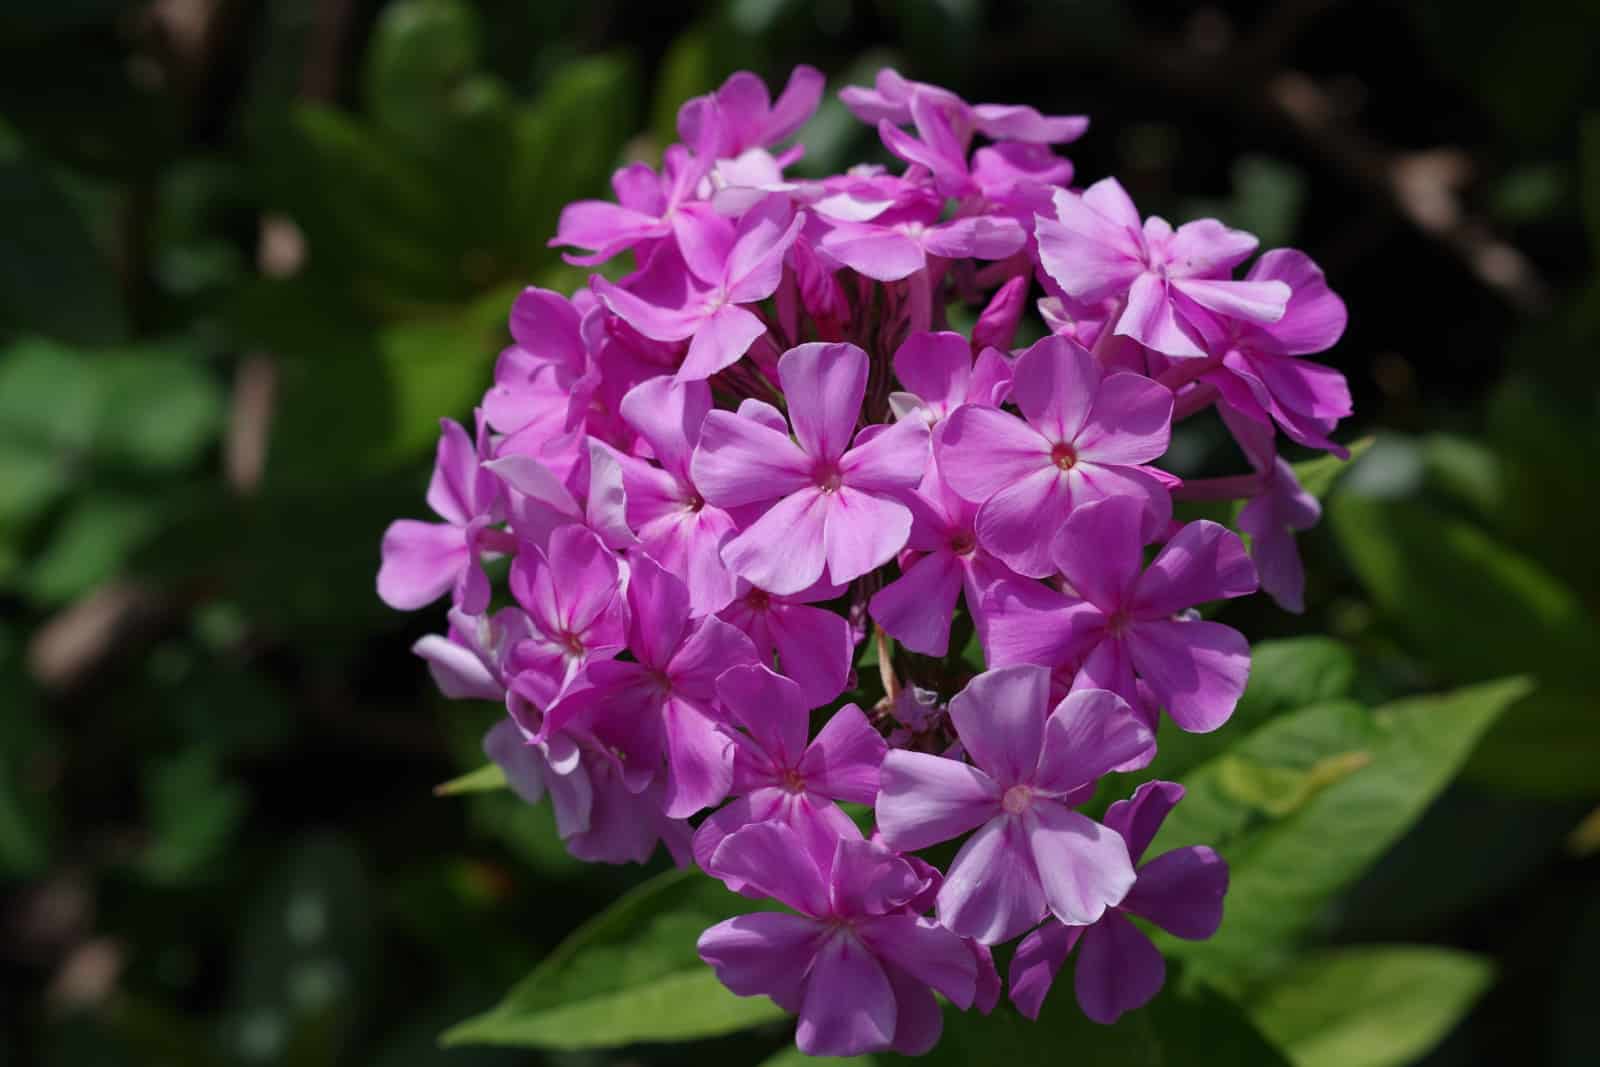 Pink Phlox Blooming in the Garden